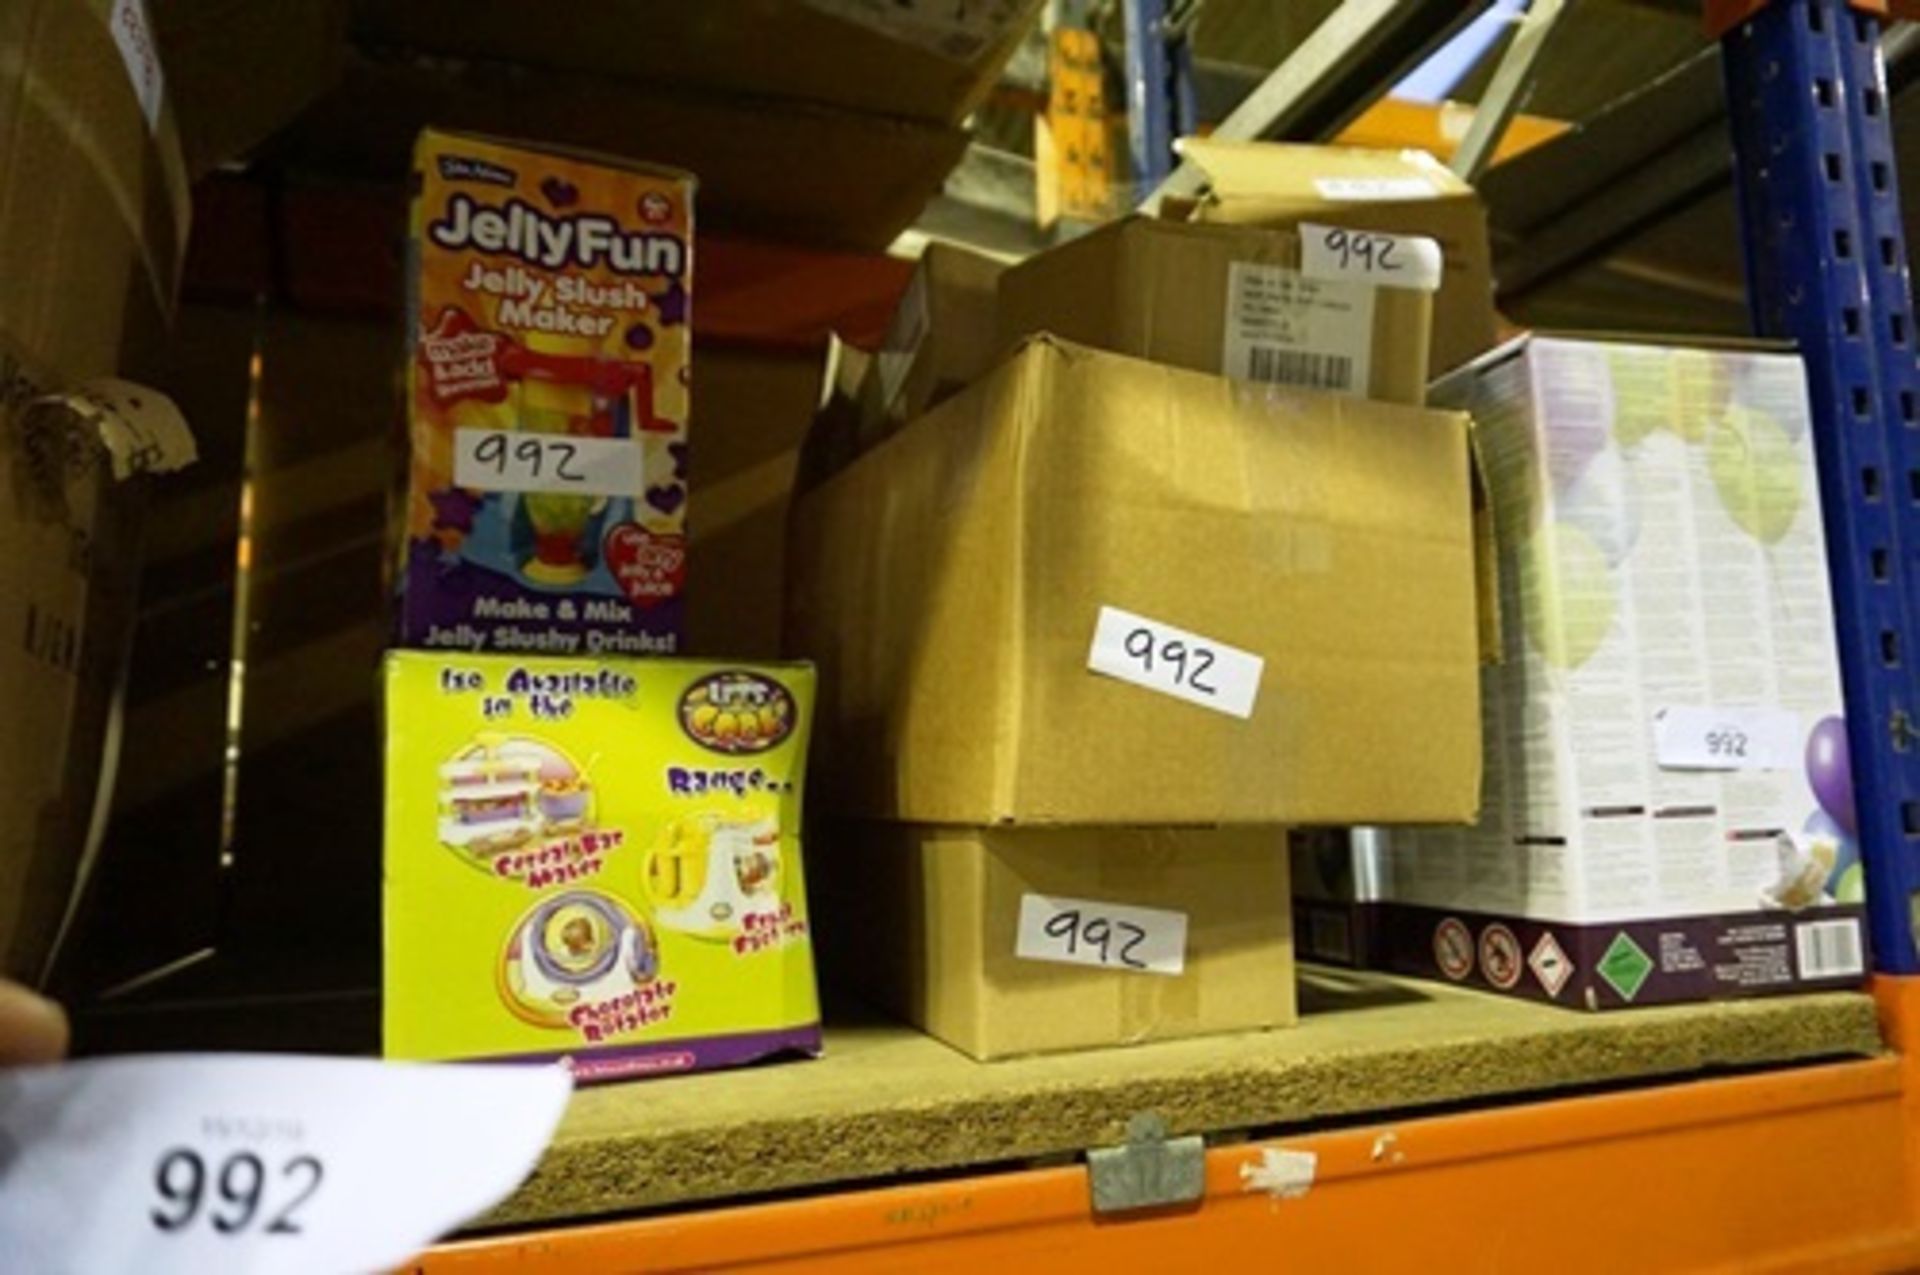 An assortment of party items including 3 x Fill'N'Away balloon makers, Jelly Slush maker, kids ice